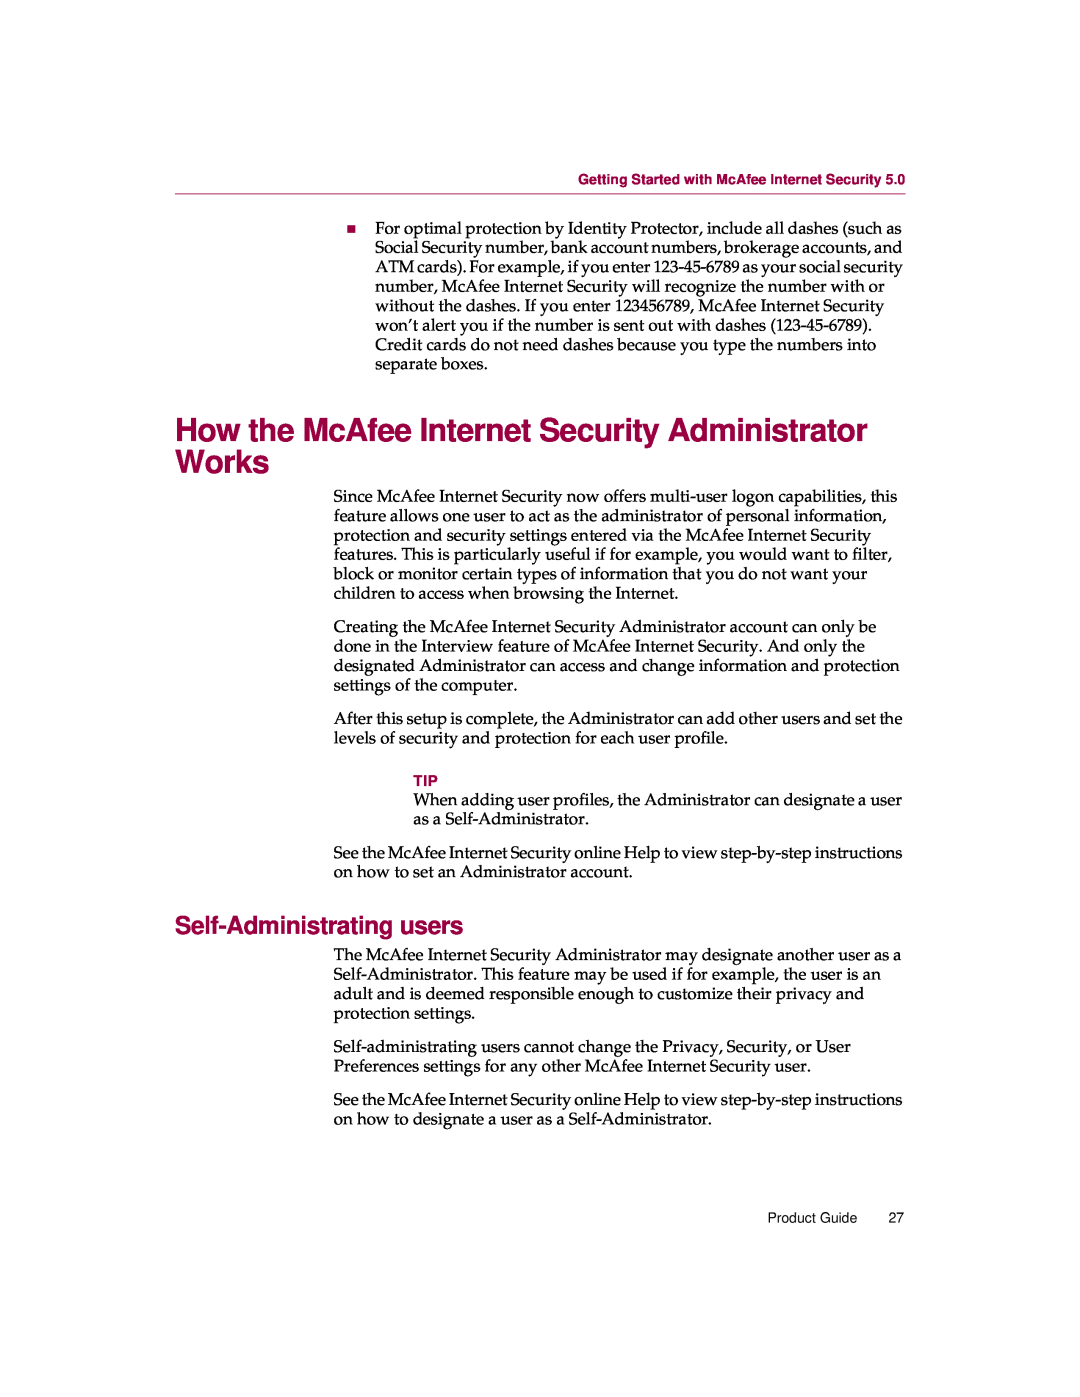 McAfee 5 manual Self-Administratingusers, Getting Started with McAfee Internet Security 